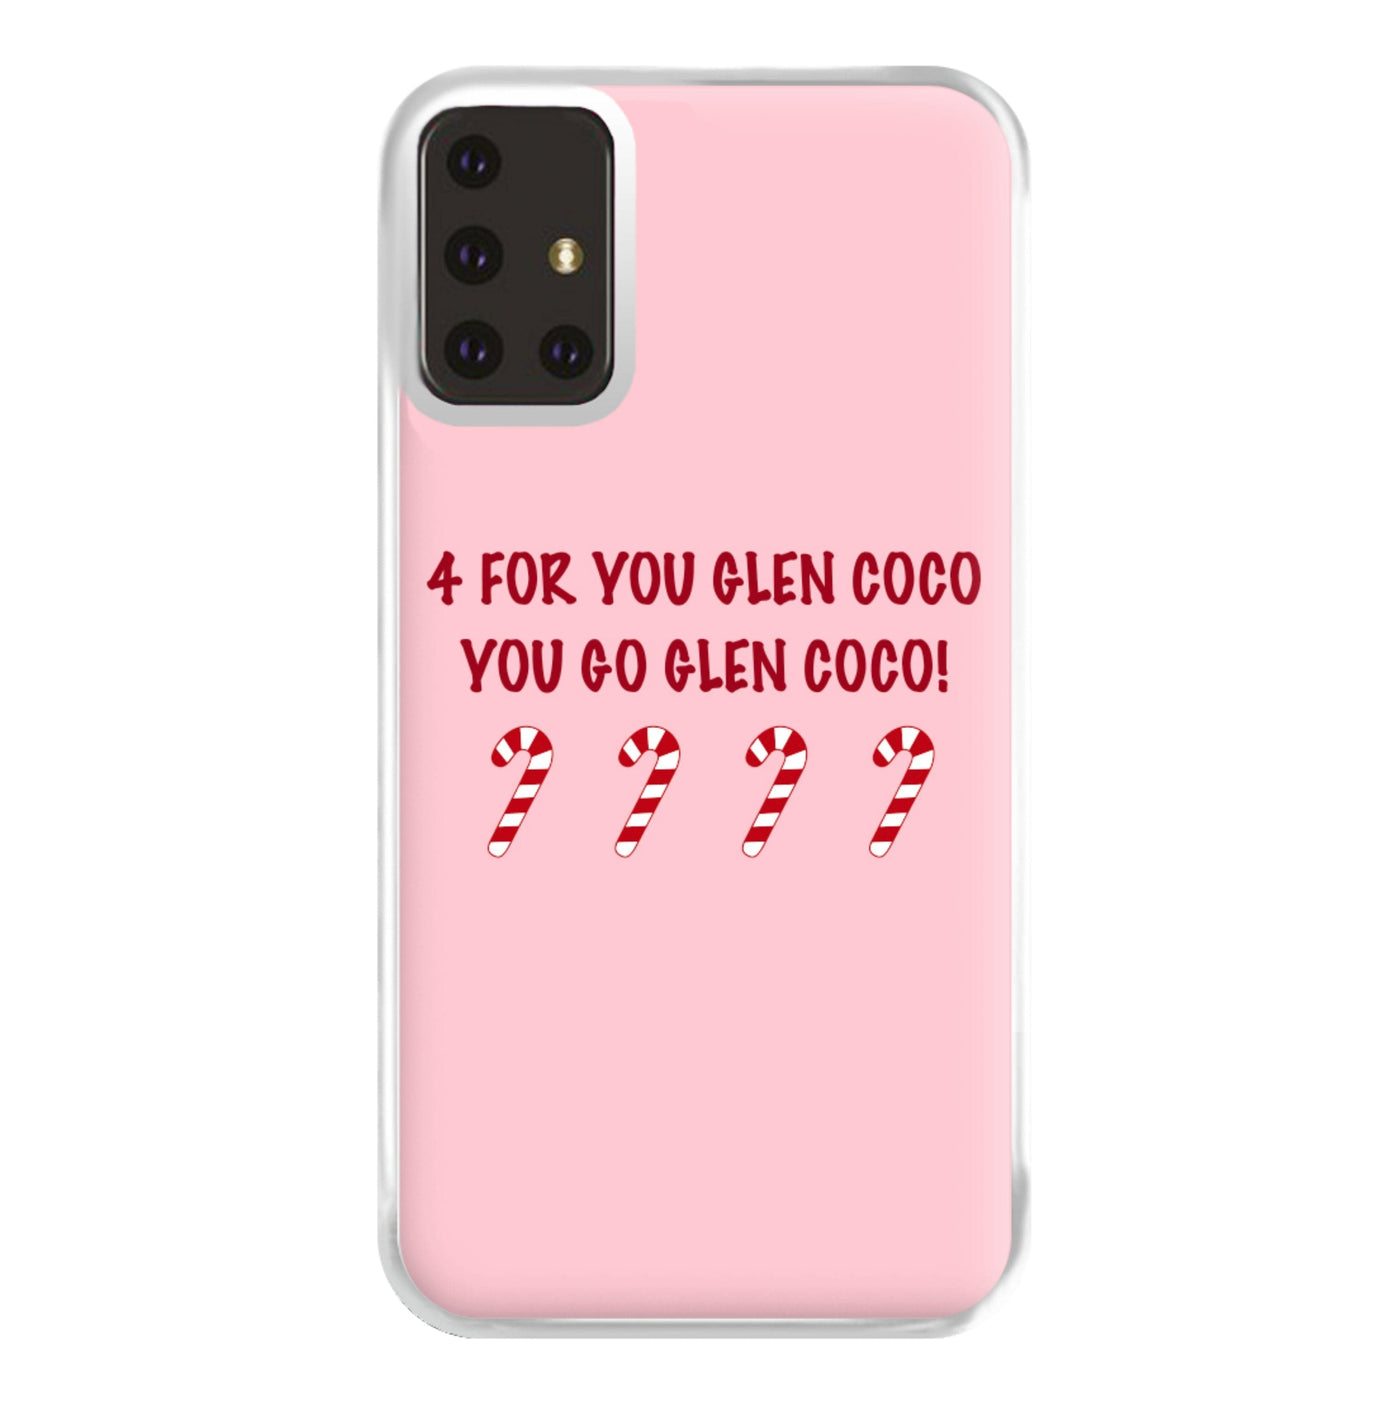 Four For You Glen Coco - Mean Girls Phone Case